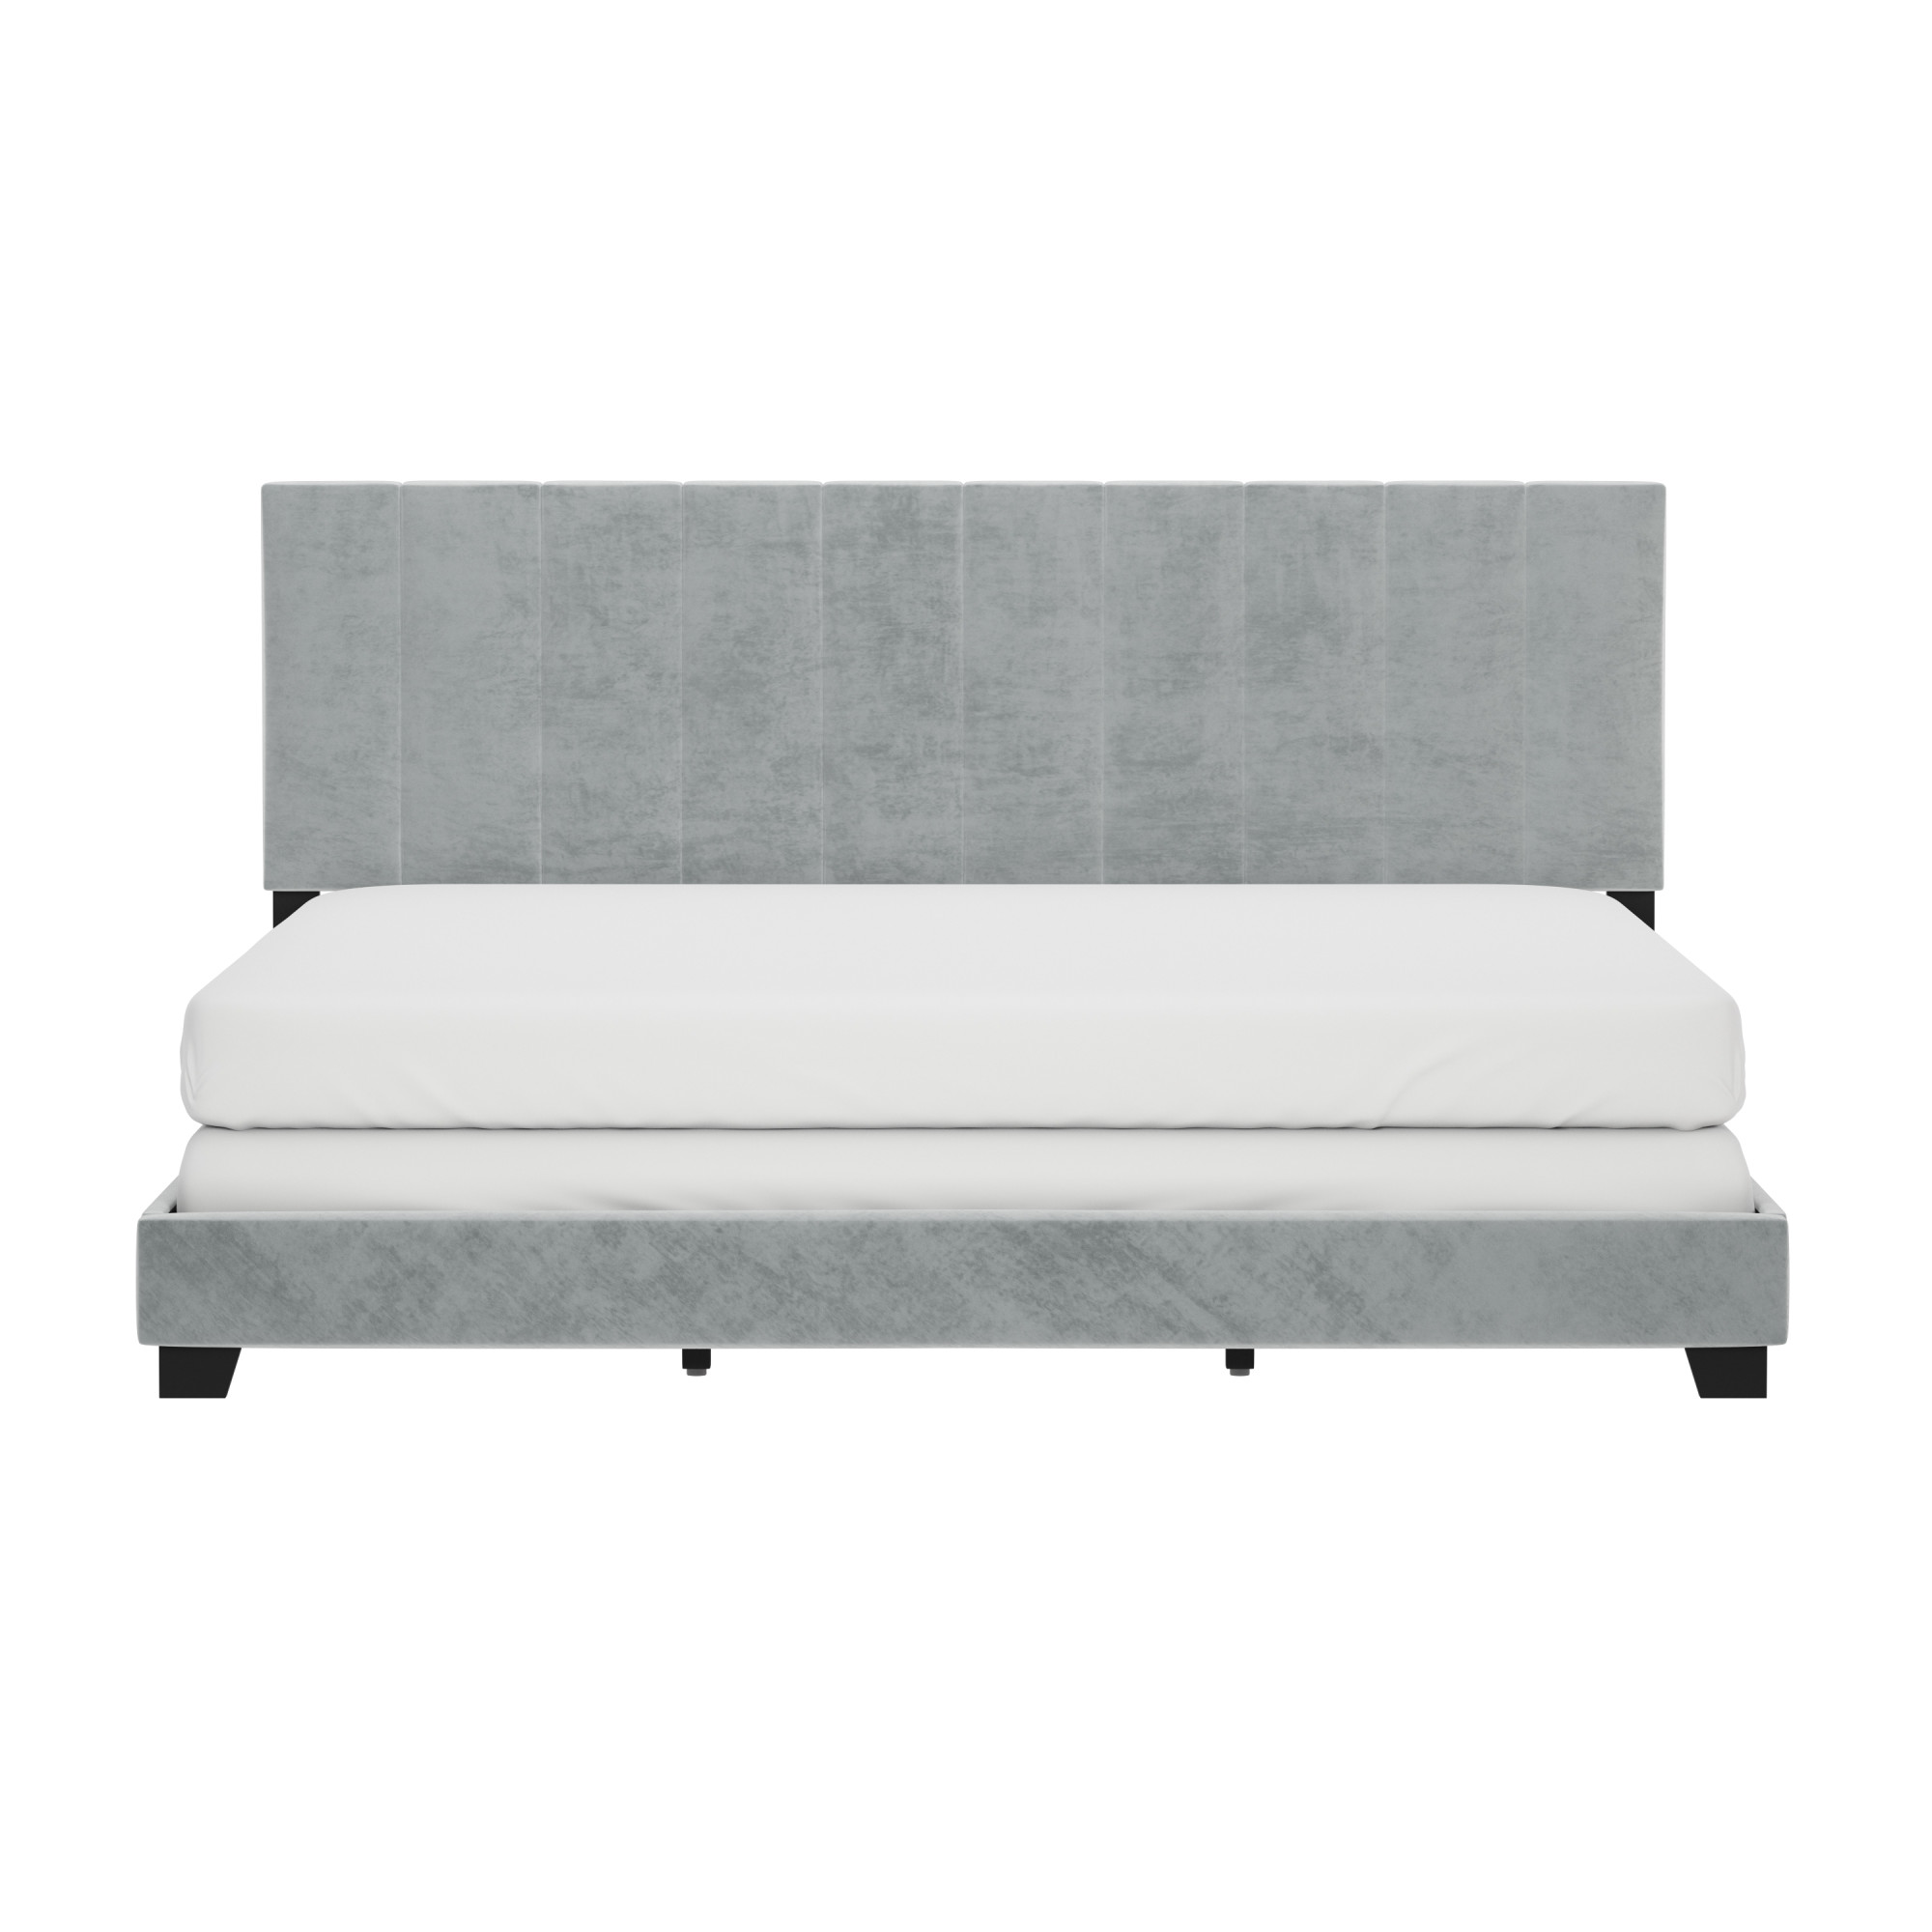 Reece Channel Stitched Upholstered King Bed, Platinum Grey, by Hillsdale Living Essentials - image 2 of 15